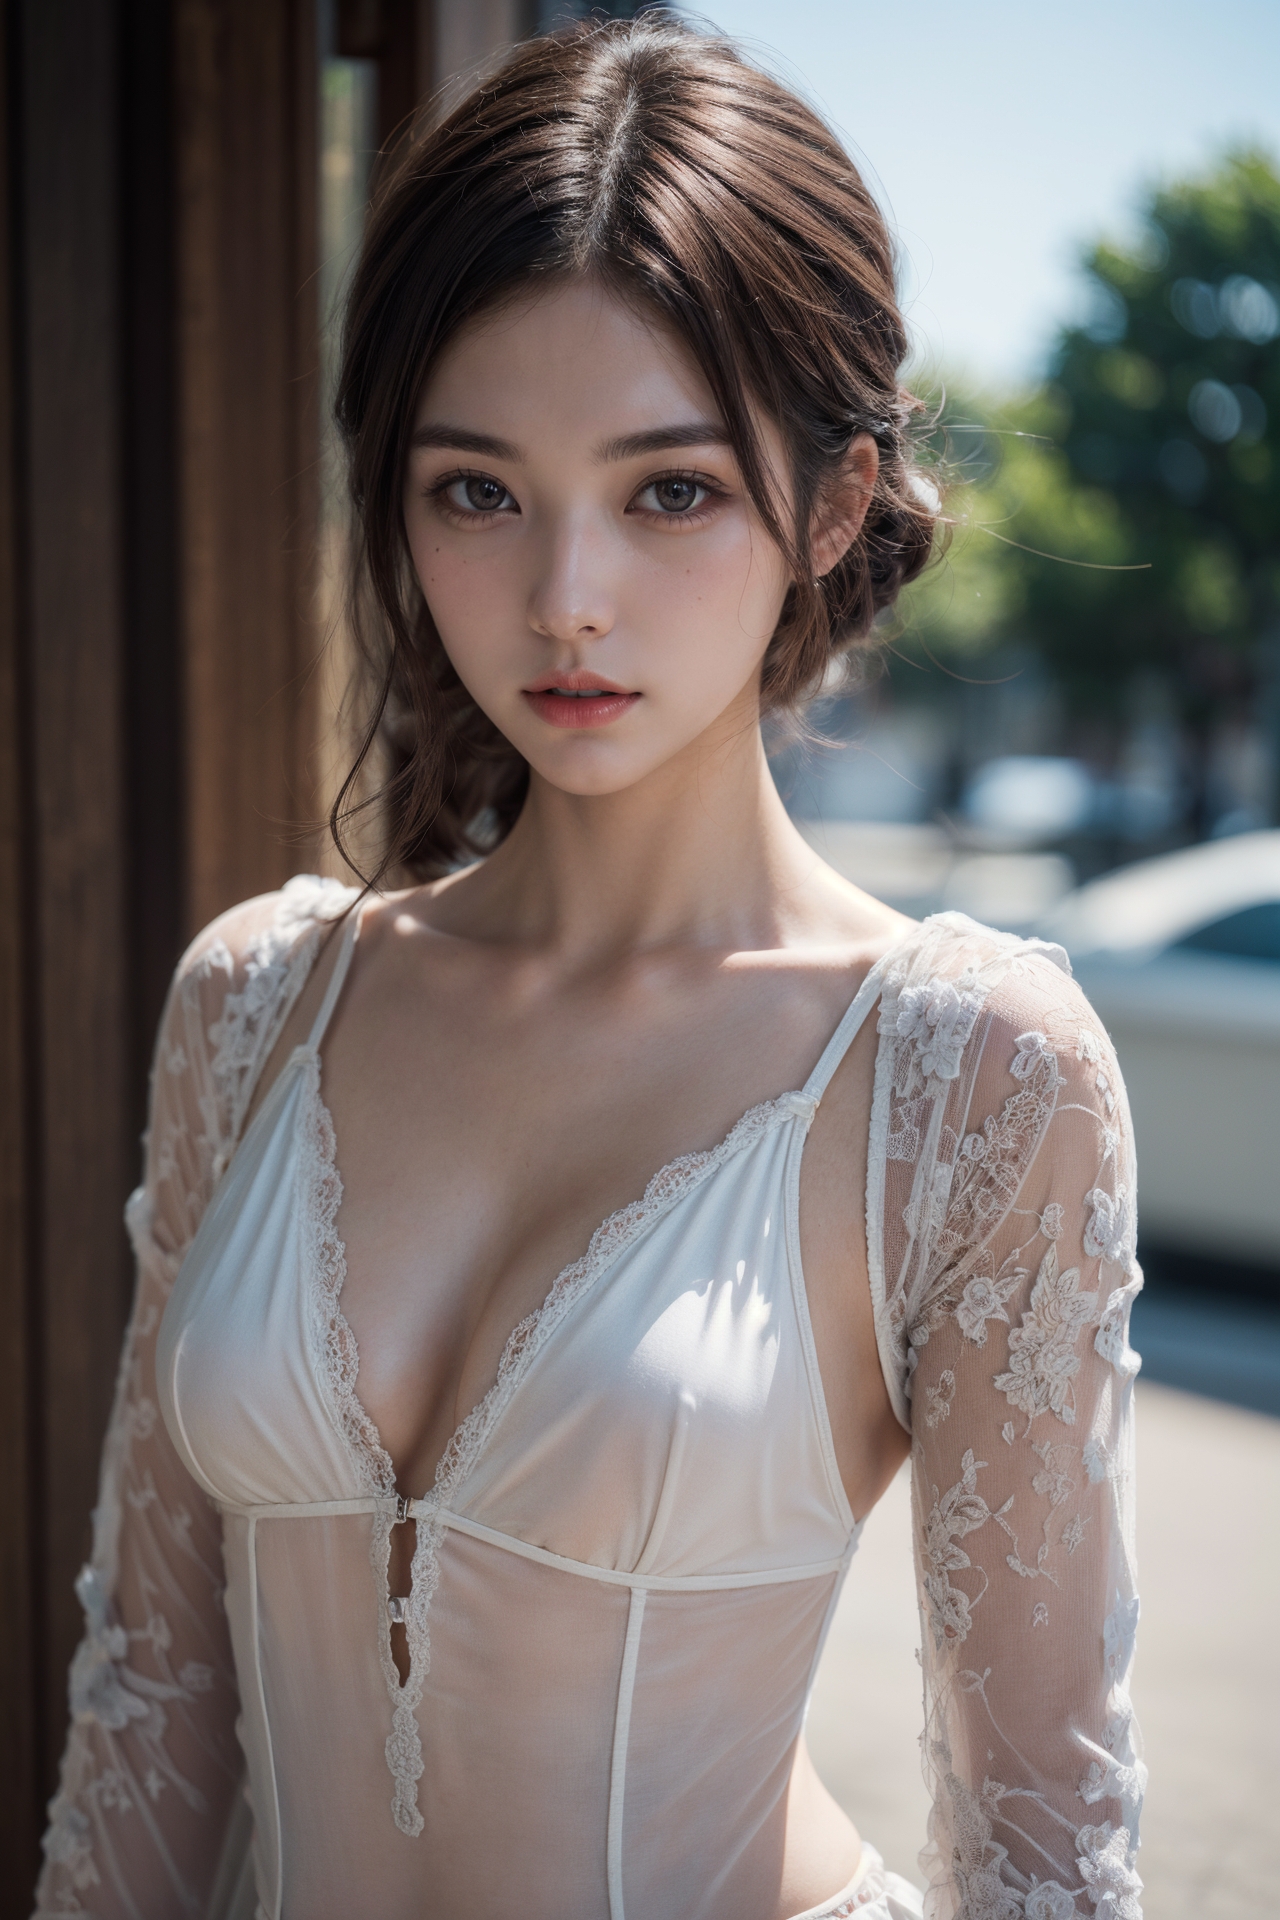 General 1280x1920 AI art Stable Diffusion women looking at viewer frills realistic brunette Asian portrait display blurred blurry background digital art